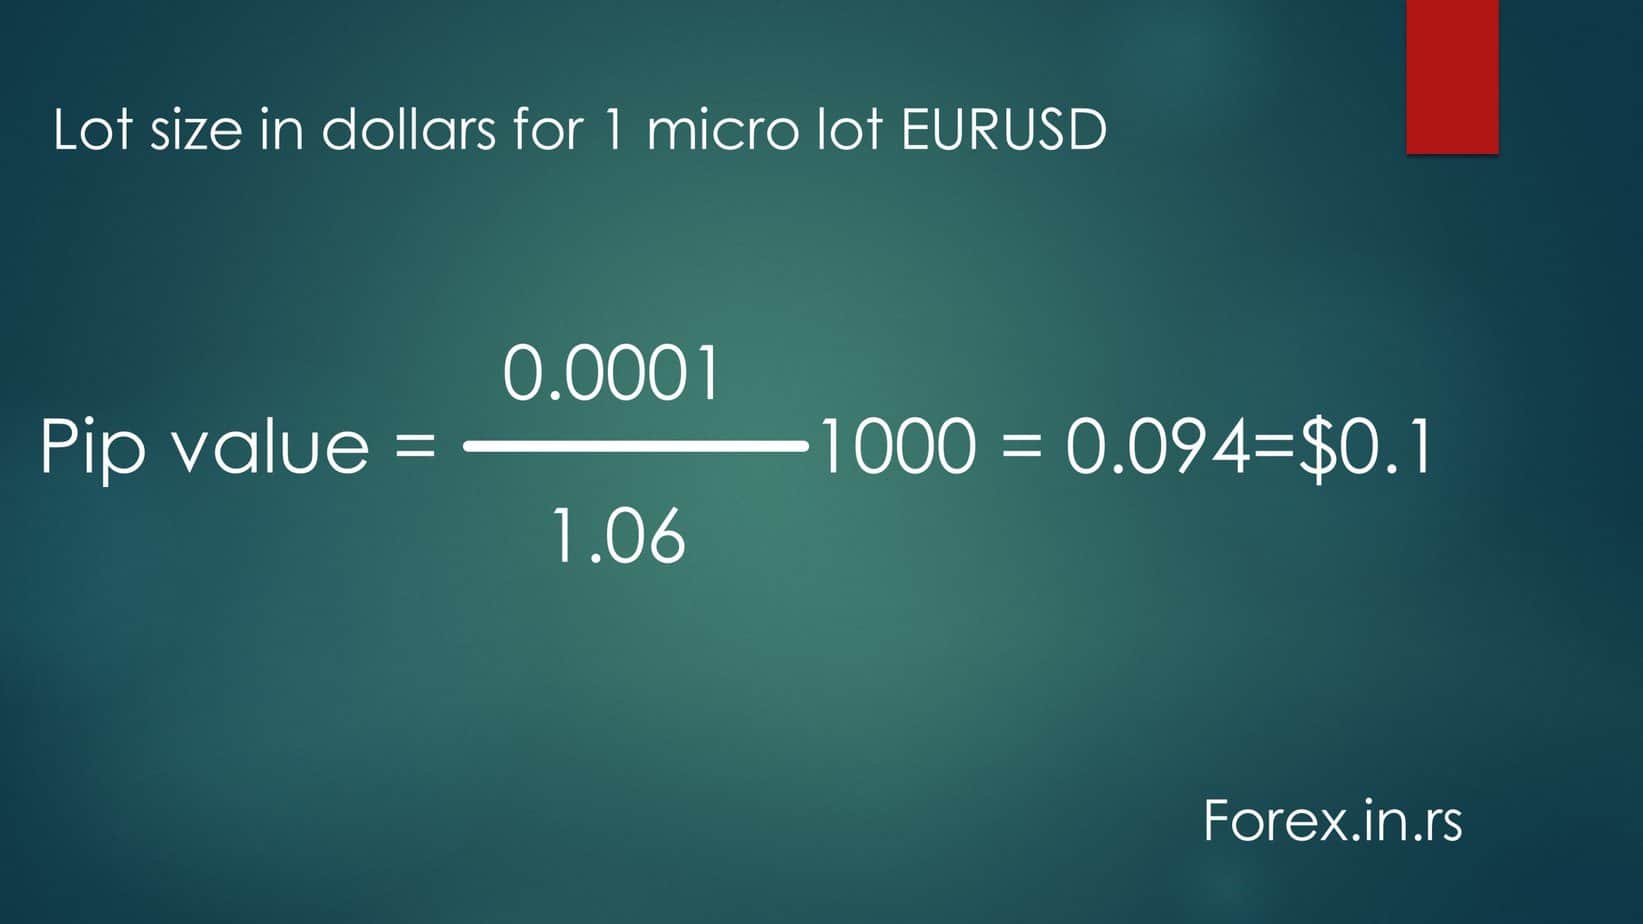 formula to calculate 1 micro lot in dollars for eurusd